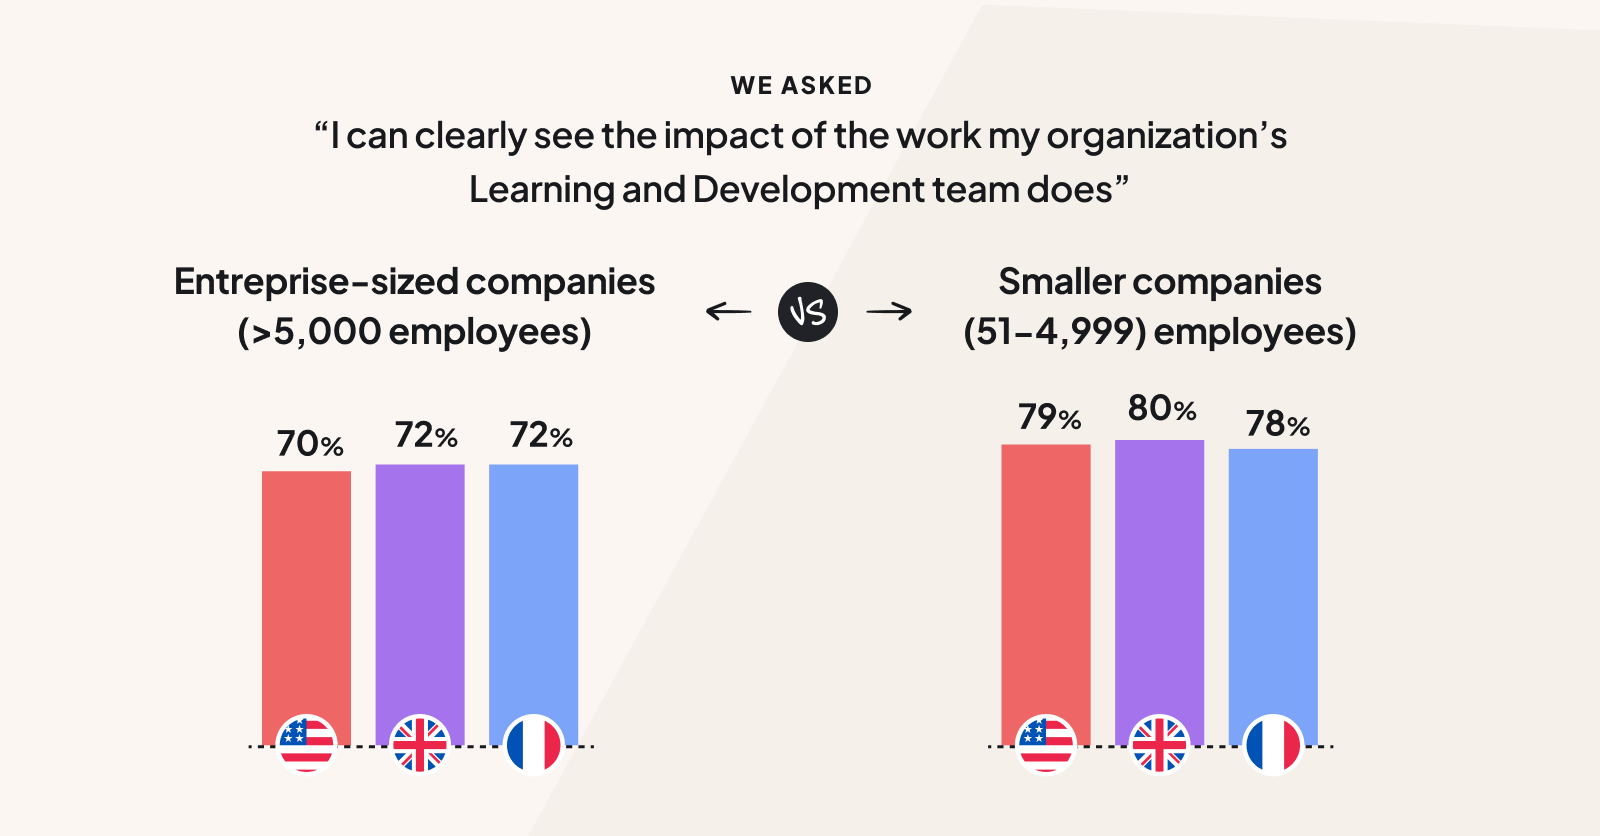 Employees at bigger companies see the impact of their L&D team slightly less clearly